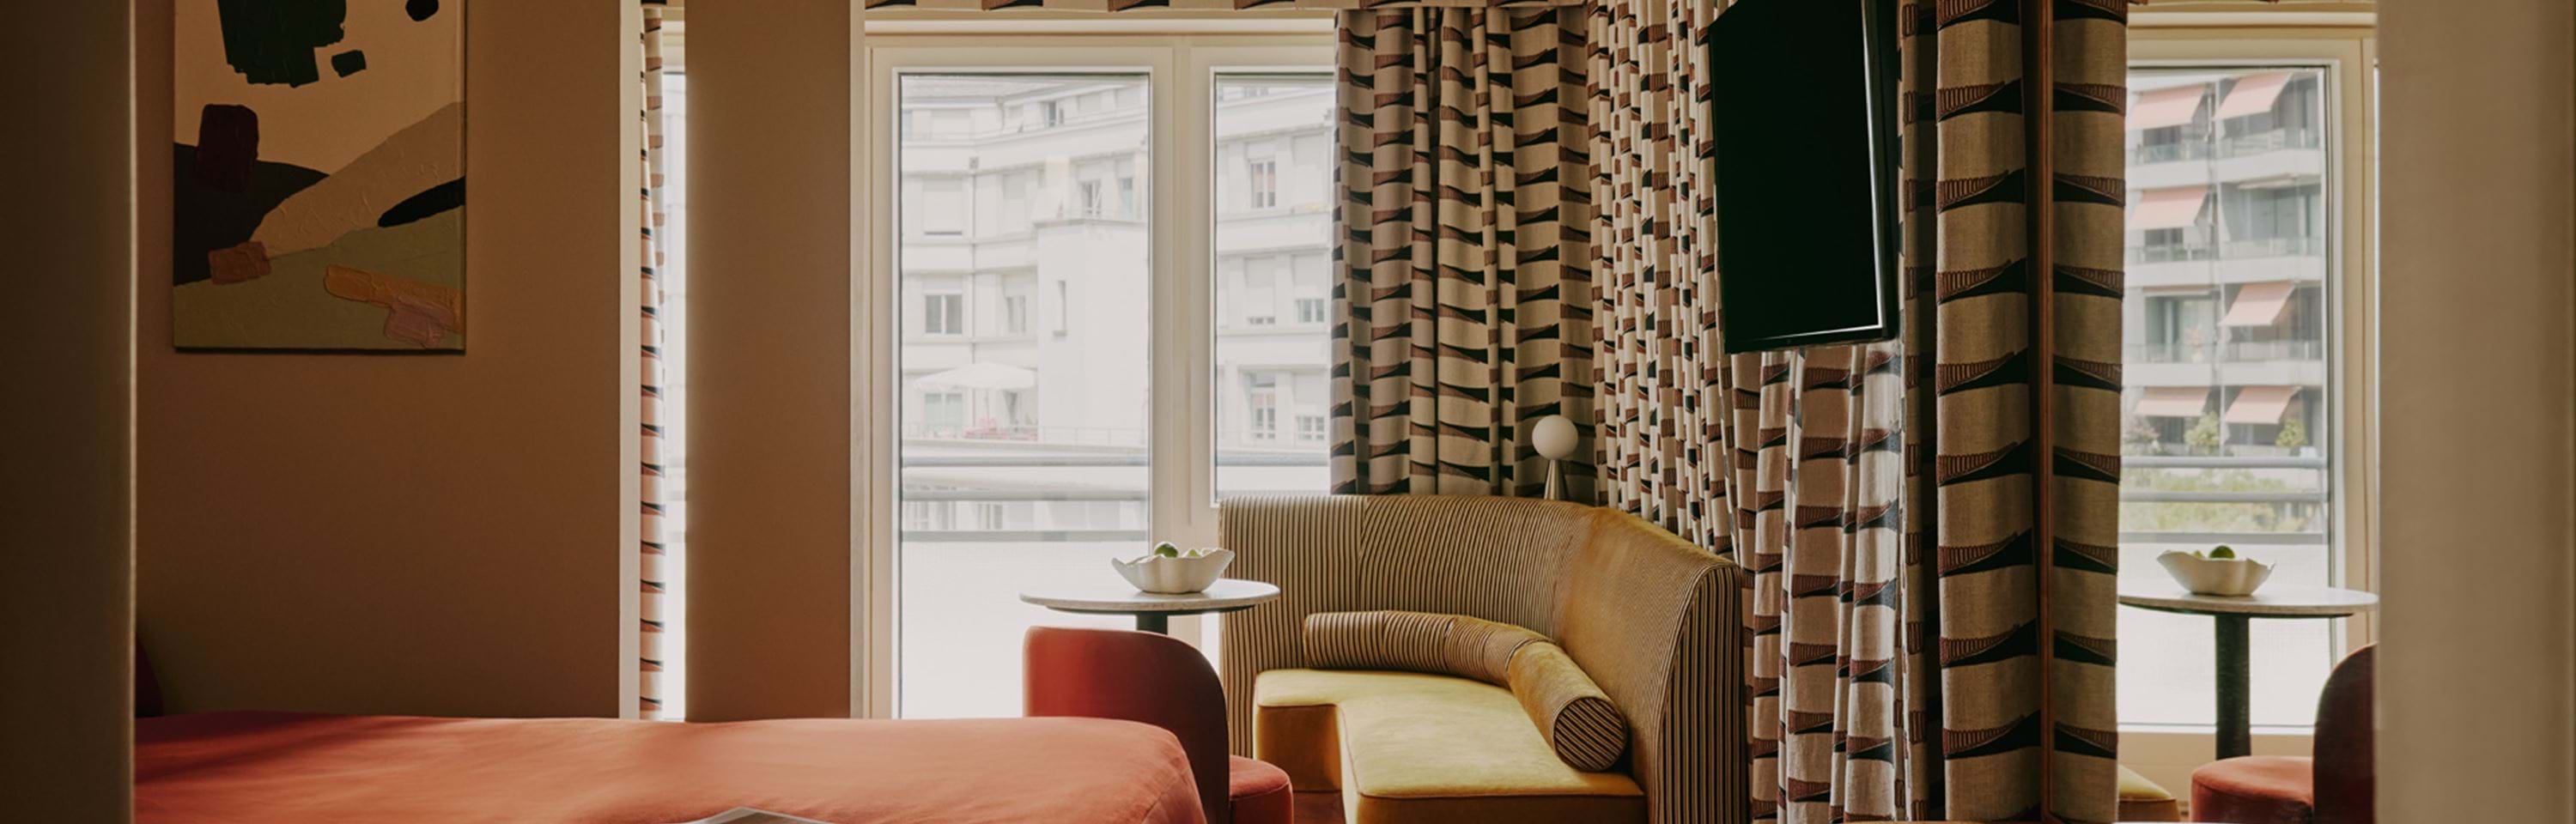 Experience an elevated stay for less at Locke Am Platz. 